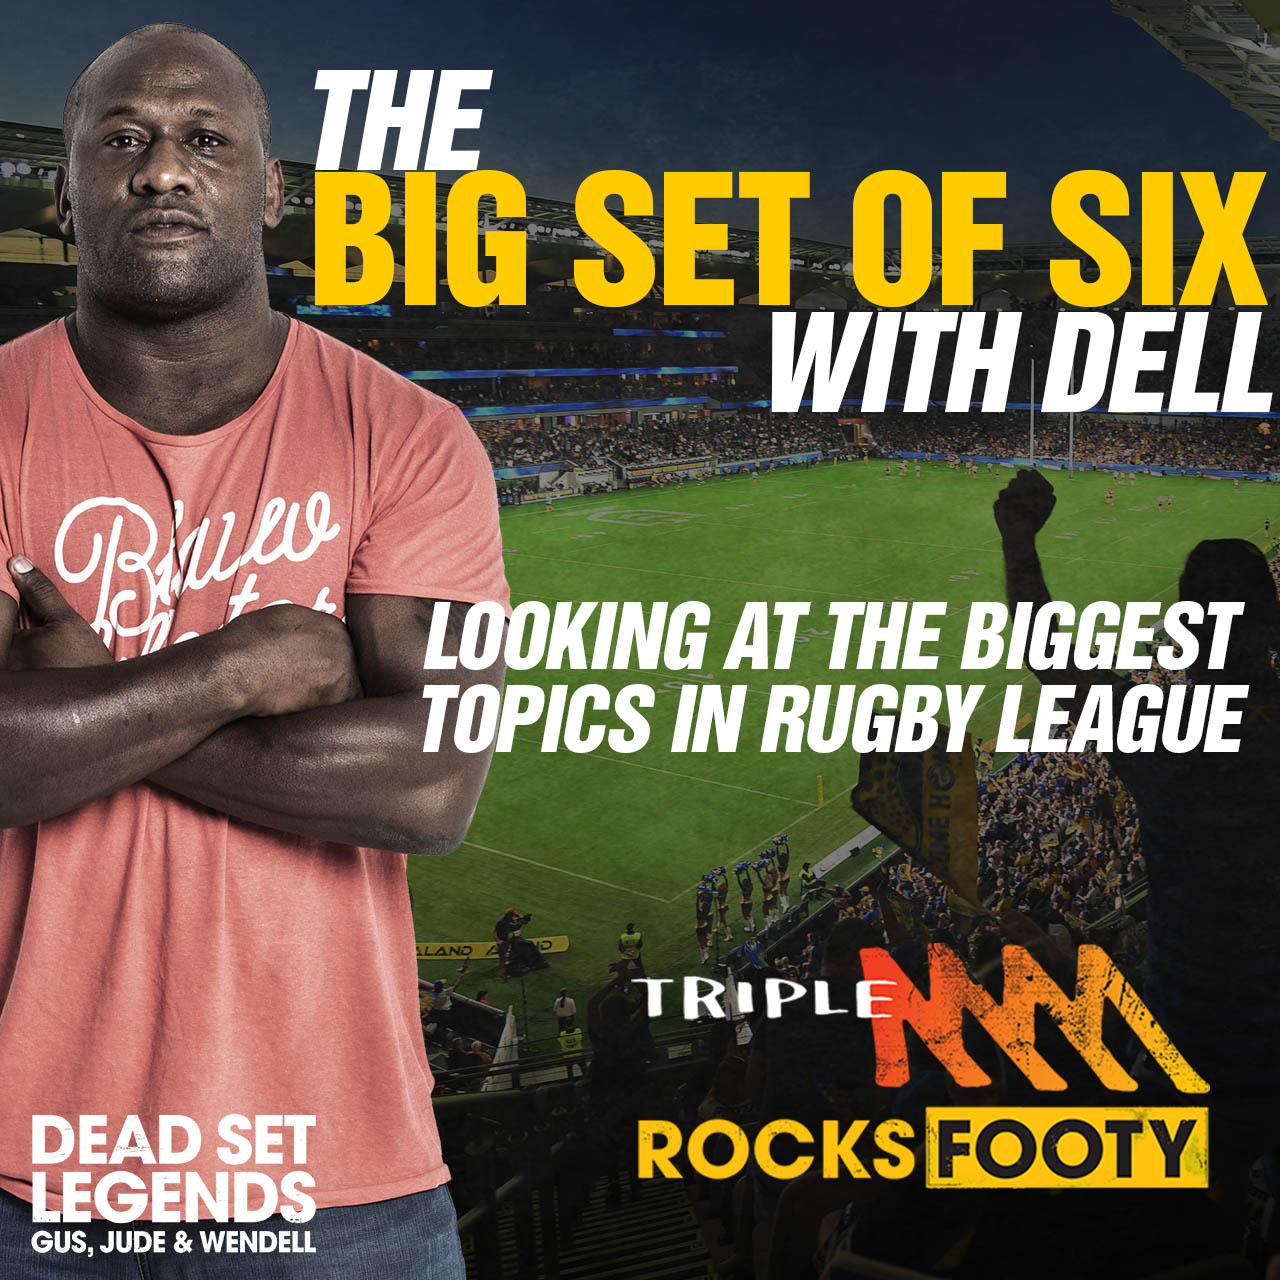 SET OF SIX | Dell's Big Call On The Bulldogs 2022 Season & Was Adam Reynolds The Right Man To Captain The Broncos?